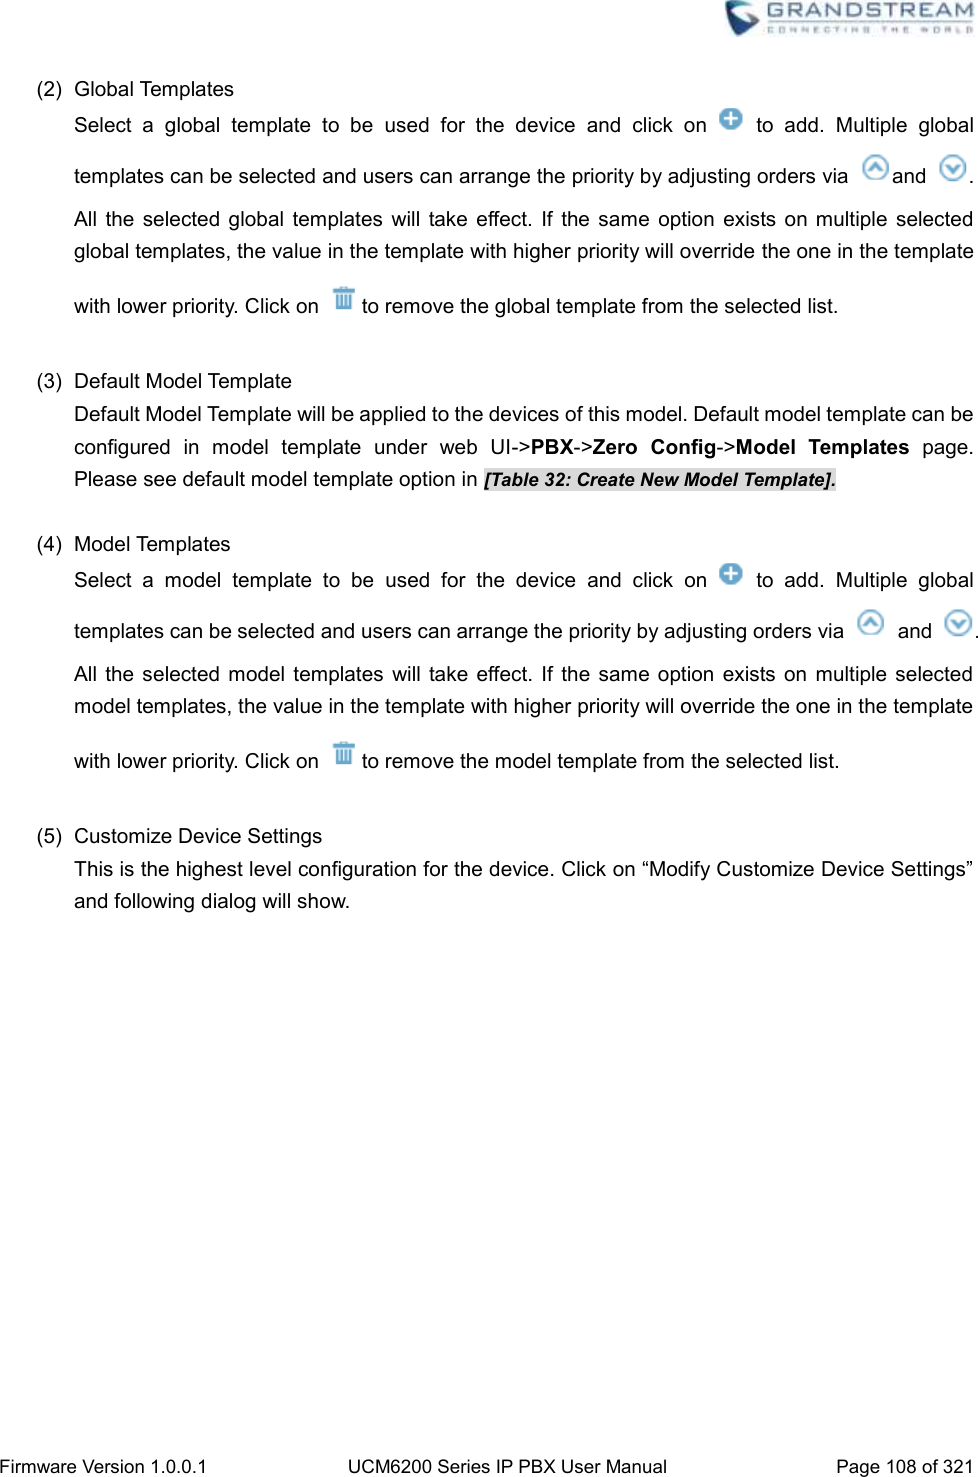  Firmware Version 1.0.0.1 UCM6200 Series IP PBX User Manual Page 108 of 321    (2)  Global Templates Select  a  global  template  to  be  used  for  the  device  and  click  on    to  add.  Multiple  global templates can be selected and users can arrange the priority by adjusting orders via  and  . All  the selected  global  templates  will  take  effect. If  the same  option  exists on  multiple  selected global templates, the value in the template with higher priority will override the one in the template with lower priority. Click on  to remove the global template from the selected list.  (3)  Default Model Template Default Model Template will be applied to the devices of this model. Default model template can be configured  in  model  template  under  web  UI-&gt;PBX-&gt;Zero  Config-&gt;Model  Templates page. Please see default model template option in [Table 32: Create New Model Template].    (4)  Model Templates Select  a  model  template  to  be  used  for  the  device  and  click  on    to  add.  Multiple  global templates can be selected and users can arrange the priority by adjusting orders via    and  . All the selected  model  templates  will take  effect. If the same  option exists on  multiple  selected model templates, the value in the template with higher priority will override the one in the template with lower priority. Click on  to remove the model template from the selected list.  (5)  Customize Device Settings This is the highest level configuration for the device. Click on “Modify Customize Device Settings” and following dialog will show. 